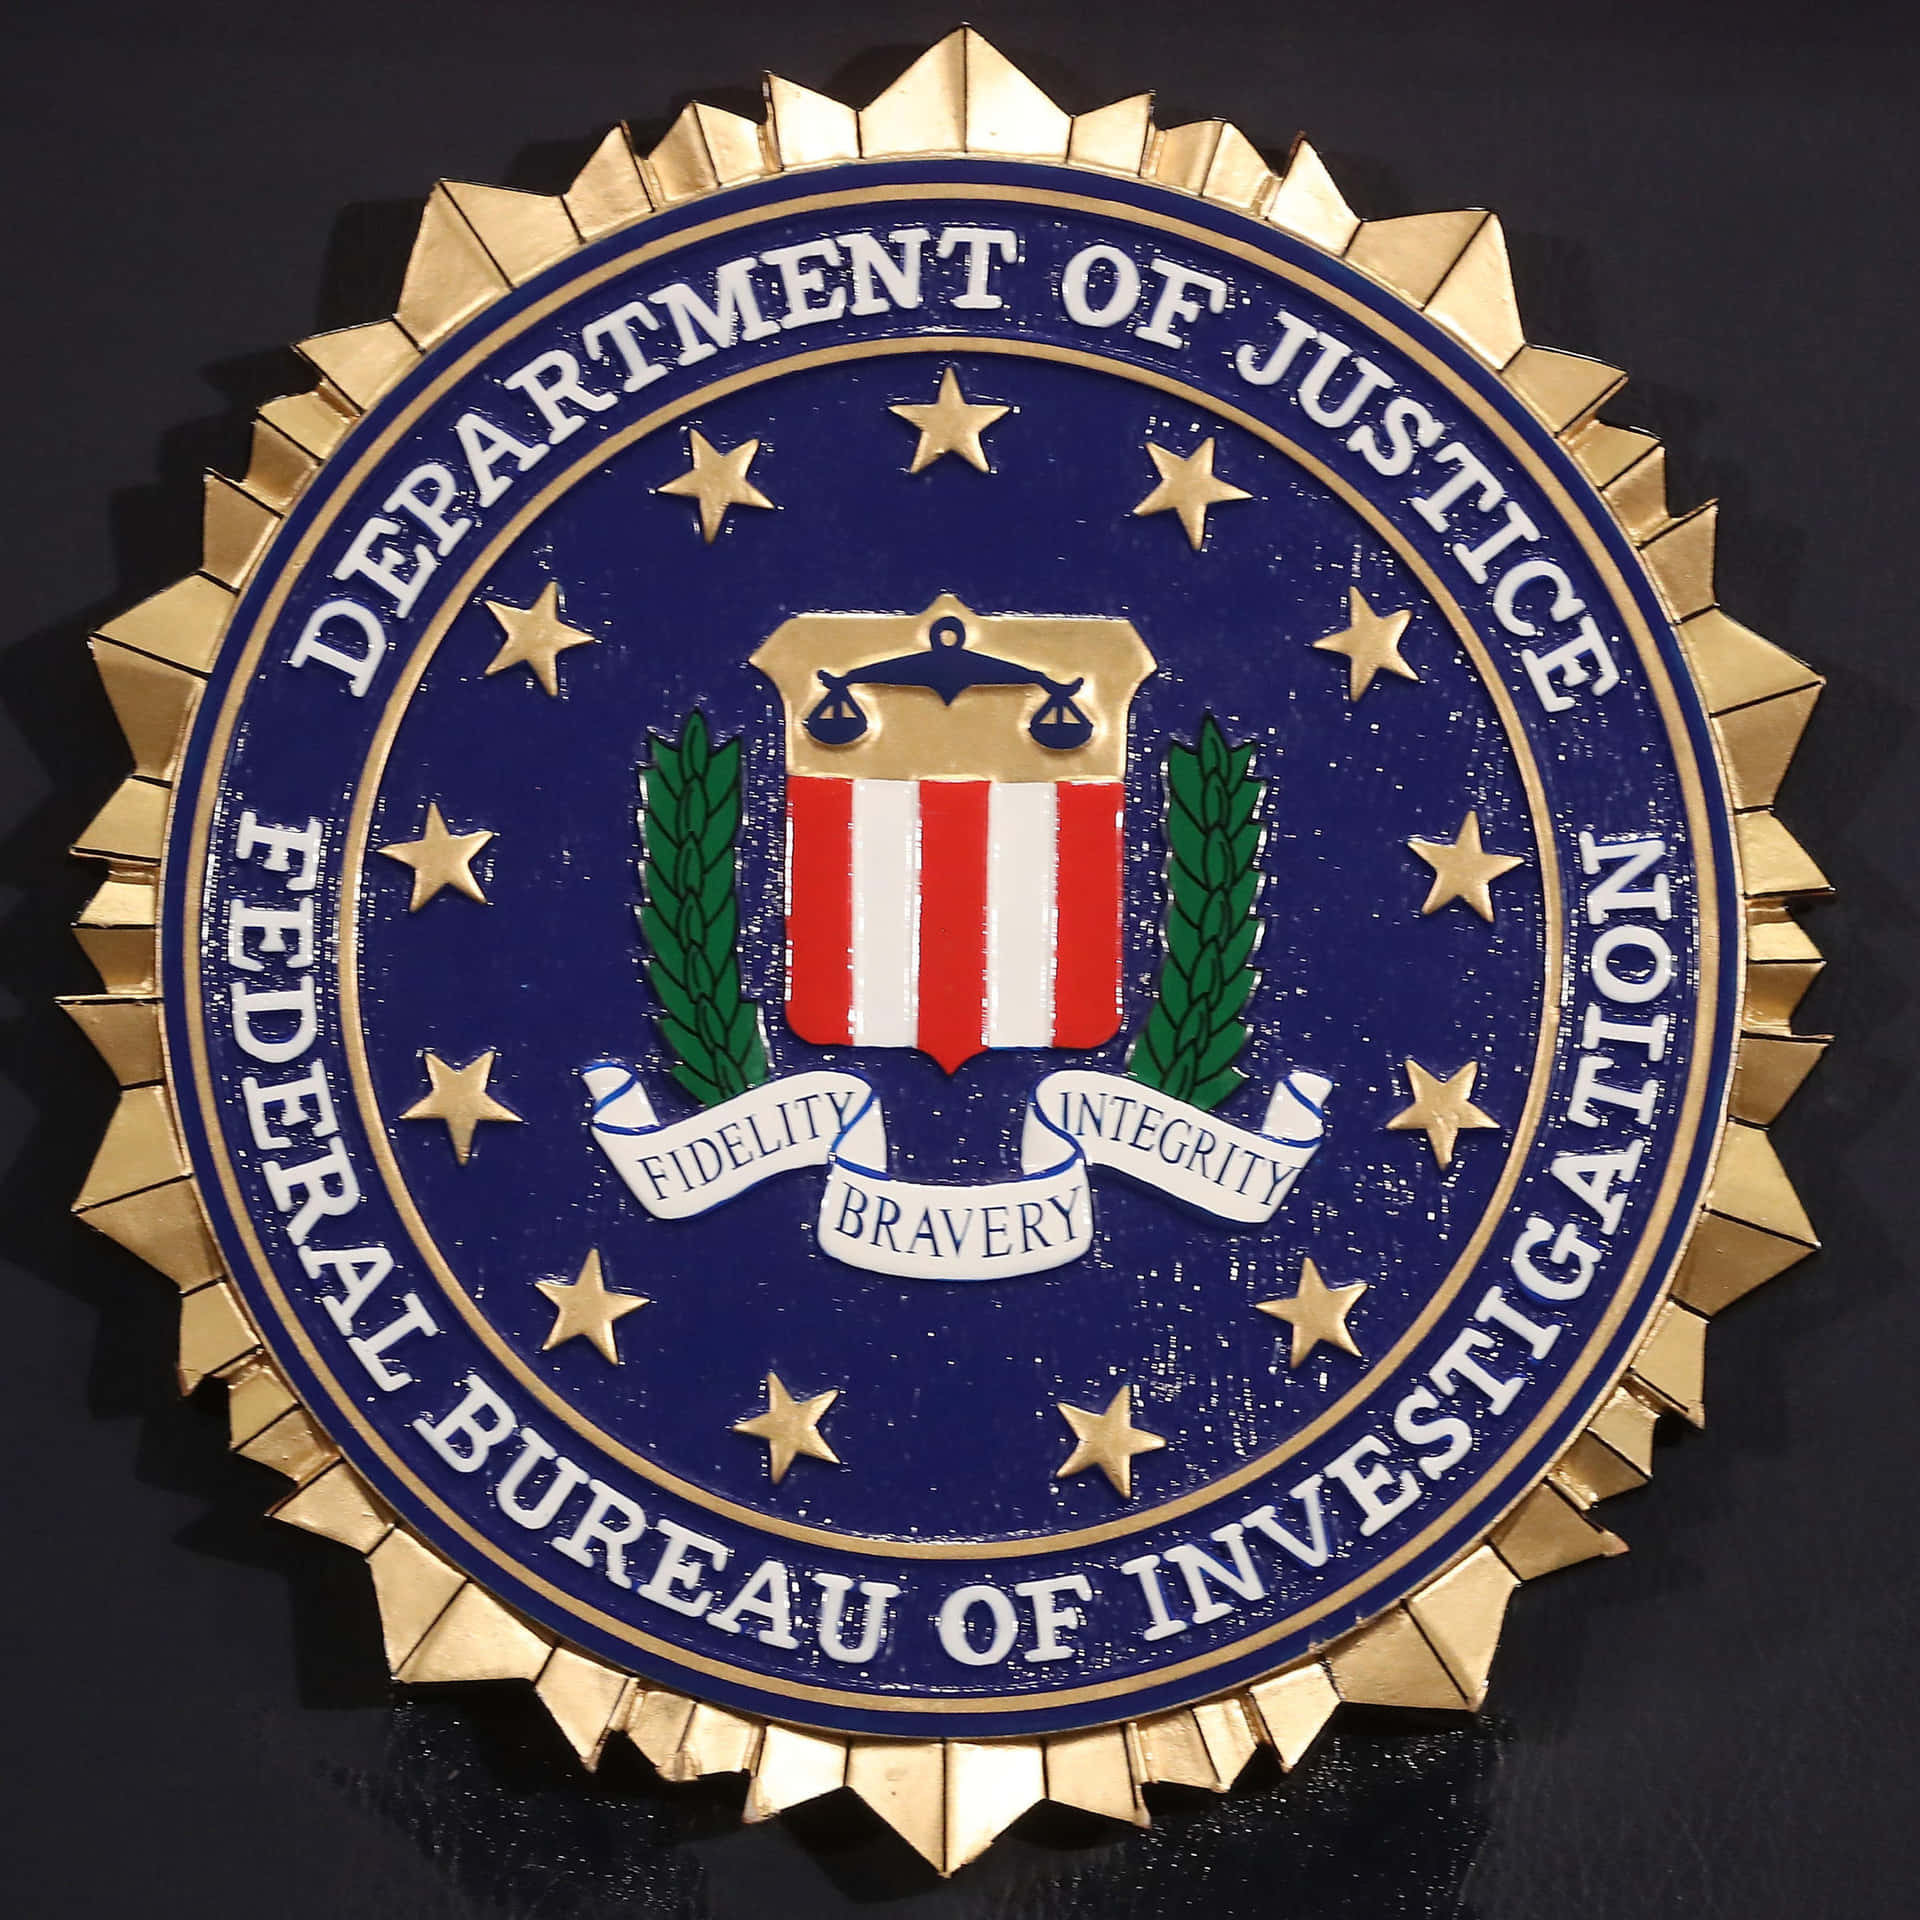 The Department Of Justice Seal Is Shown On A Black Background